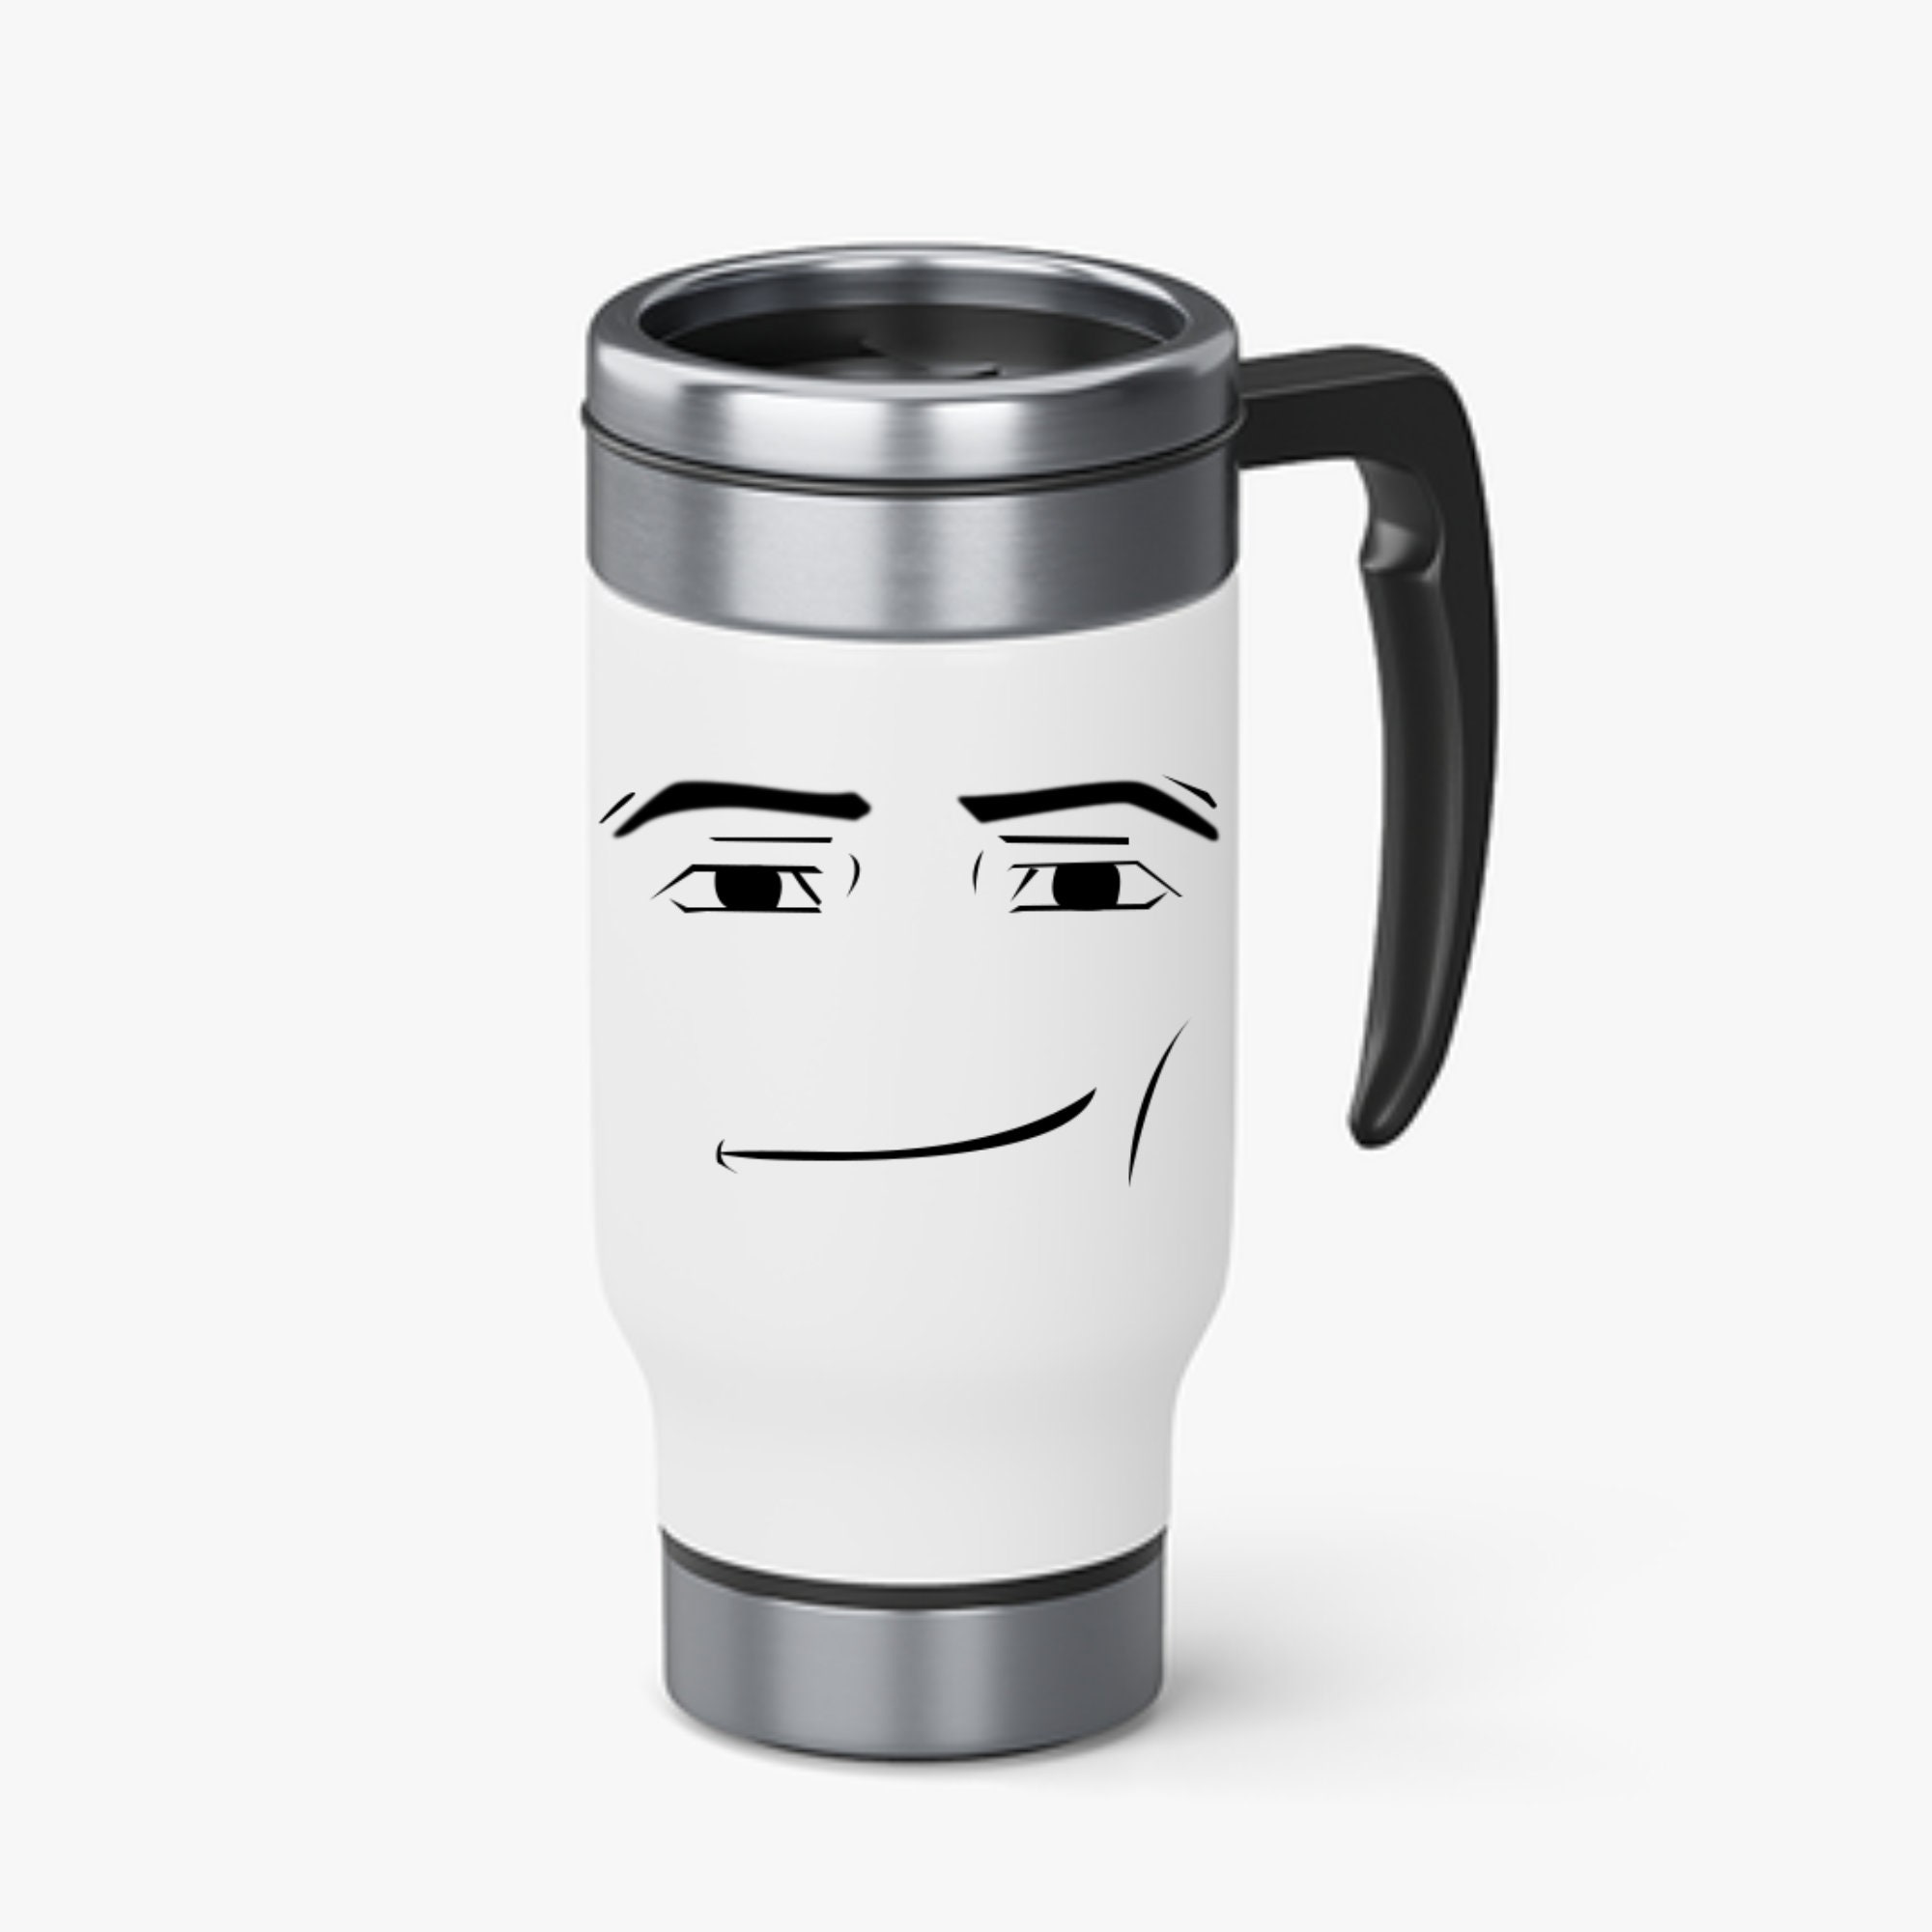 You can still get the Man Face from the Man package! (Same probably goes  for Woman face) : r/roblox